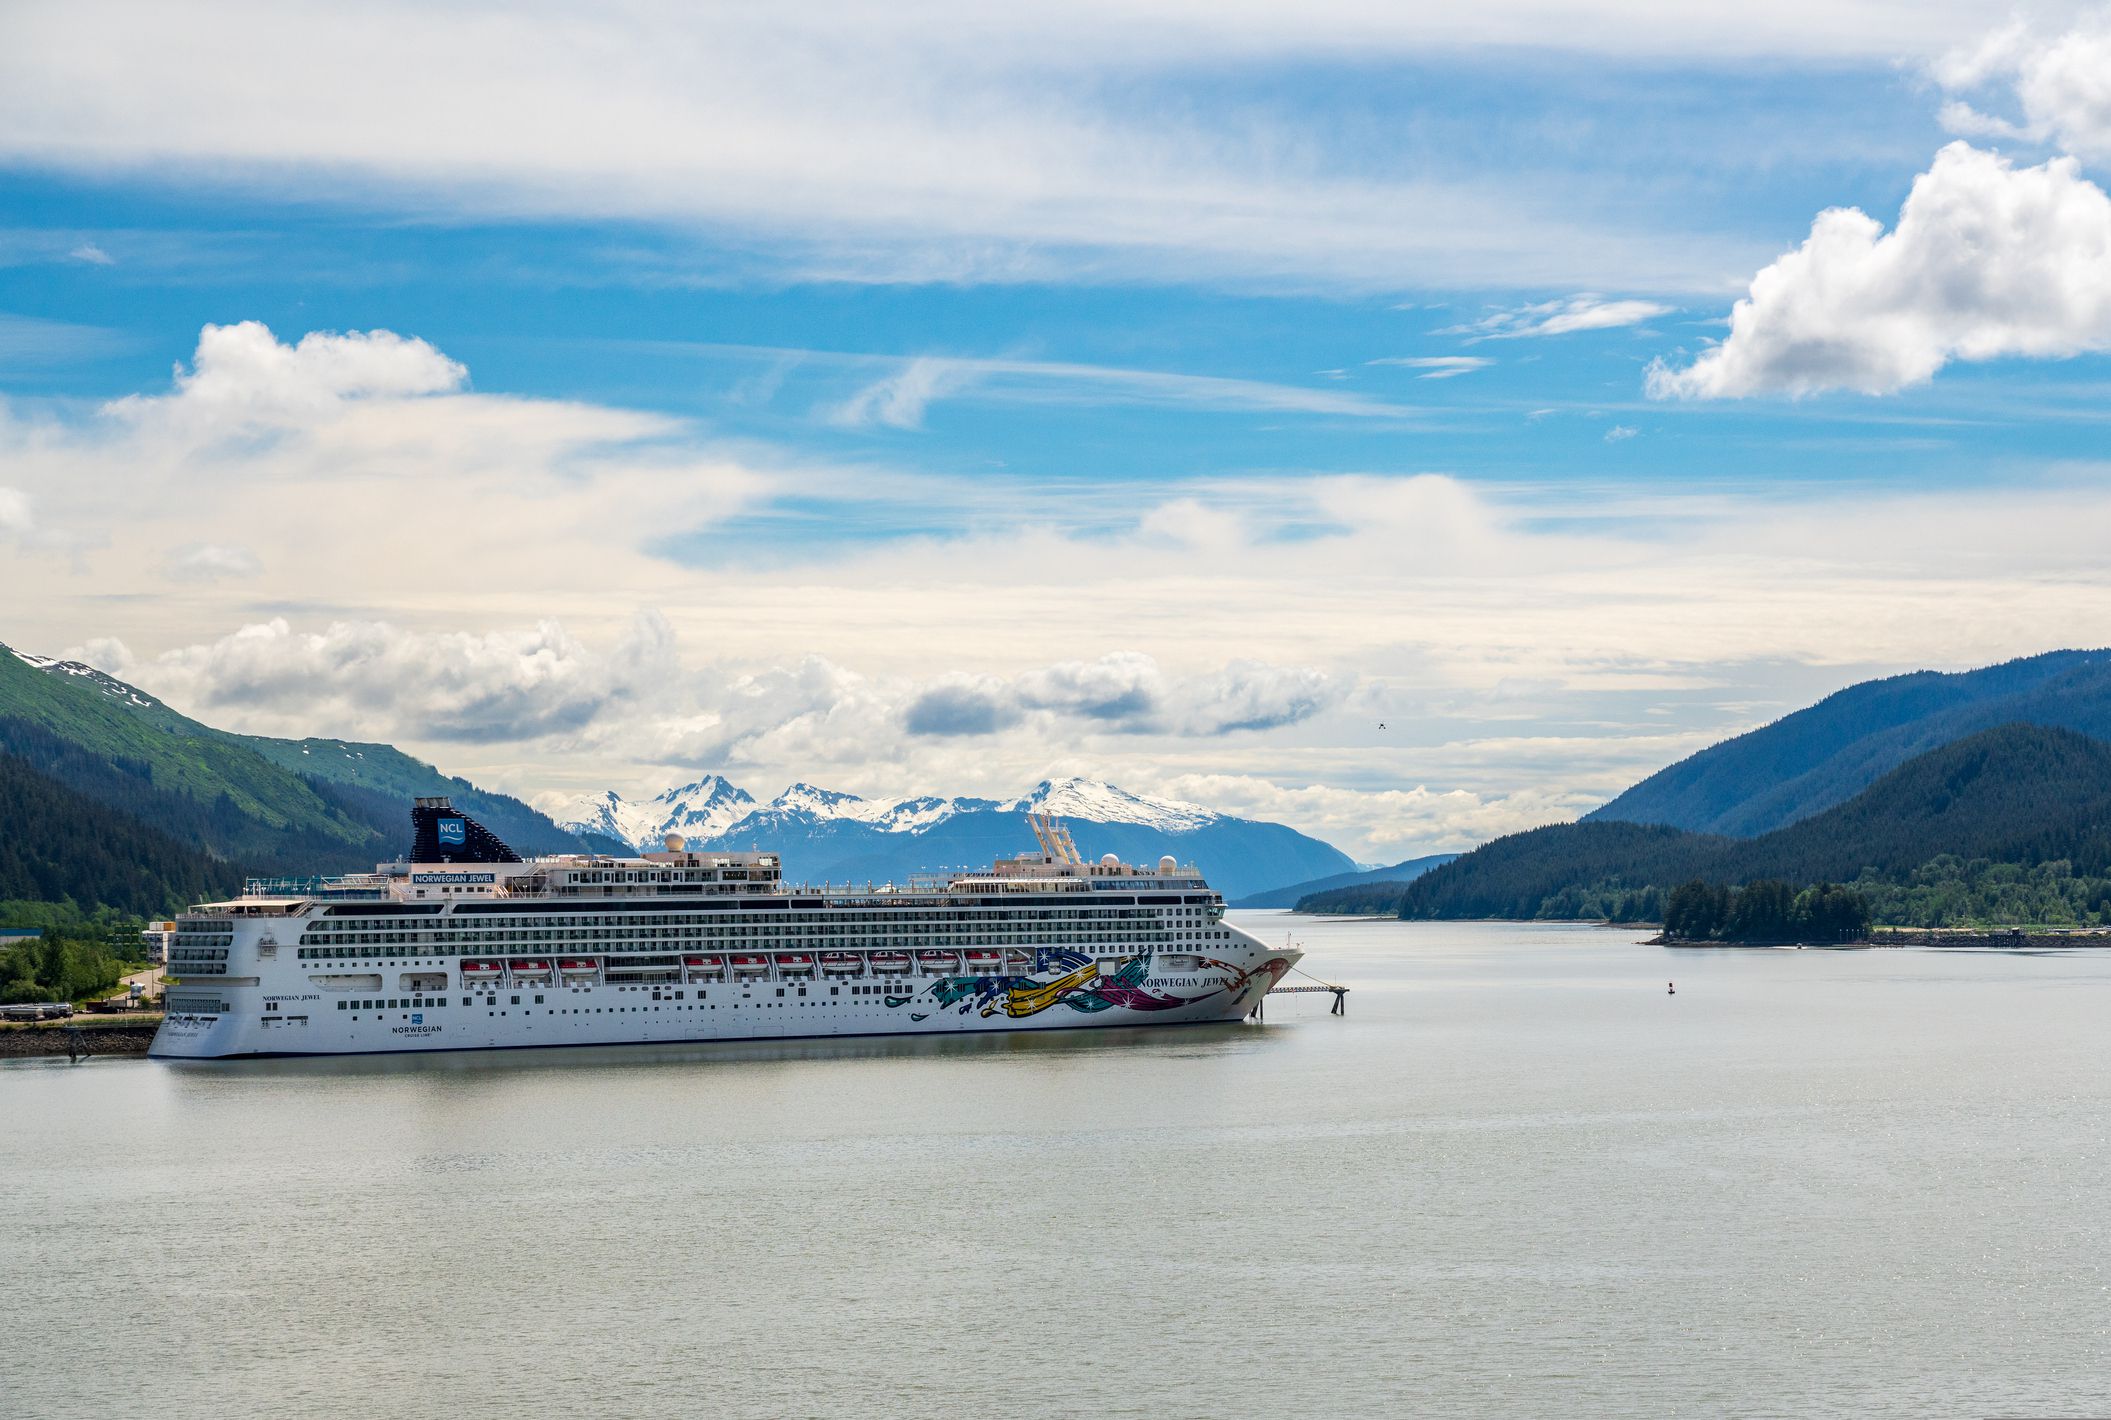 <p>Juneau isn’t on a true ocean coast, given that it’s part of the Inside Passage. But that doesn’t mean you’ll miss out on beautiful water views. Cruise ships roll in daily, and you’ll have the added bonus of dramatic mountainous landscapes here.</p><ul><li>Population: 31,685</li><li>Median Household Income: $90,126</li><li>Cost of Living: 114.2% of U.S. average</li><li>Median Rent Price: $1,319</li><li>Home Price-to-Income Ratio: 3.97</li><li>Average Property Tax: 0.98%</li></ul><p class="padding-top-ms u-margin-bottom-ms"><b>Housing Affordability</b>: Median home prices in Juneau reach nearly $360,000, making this inaccessible for many potential home buyers. Rent is a little more digestible at $1,319 a month.</p>